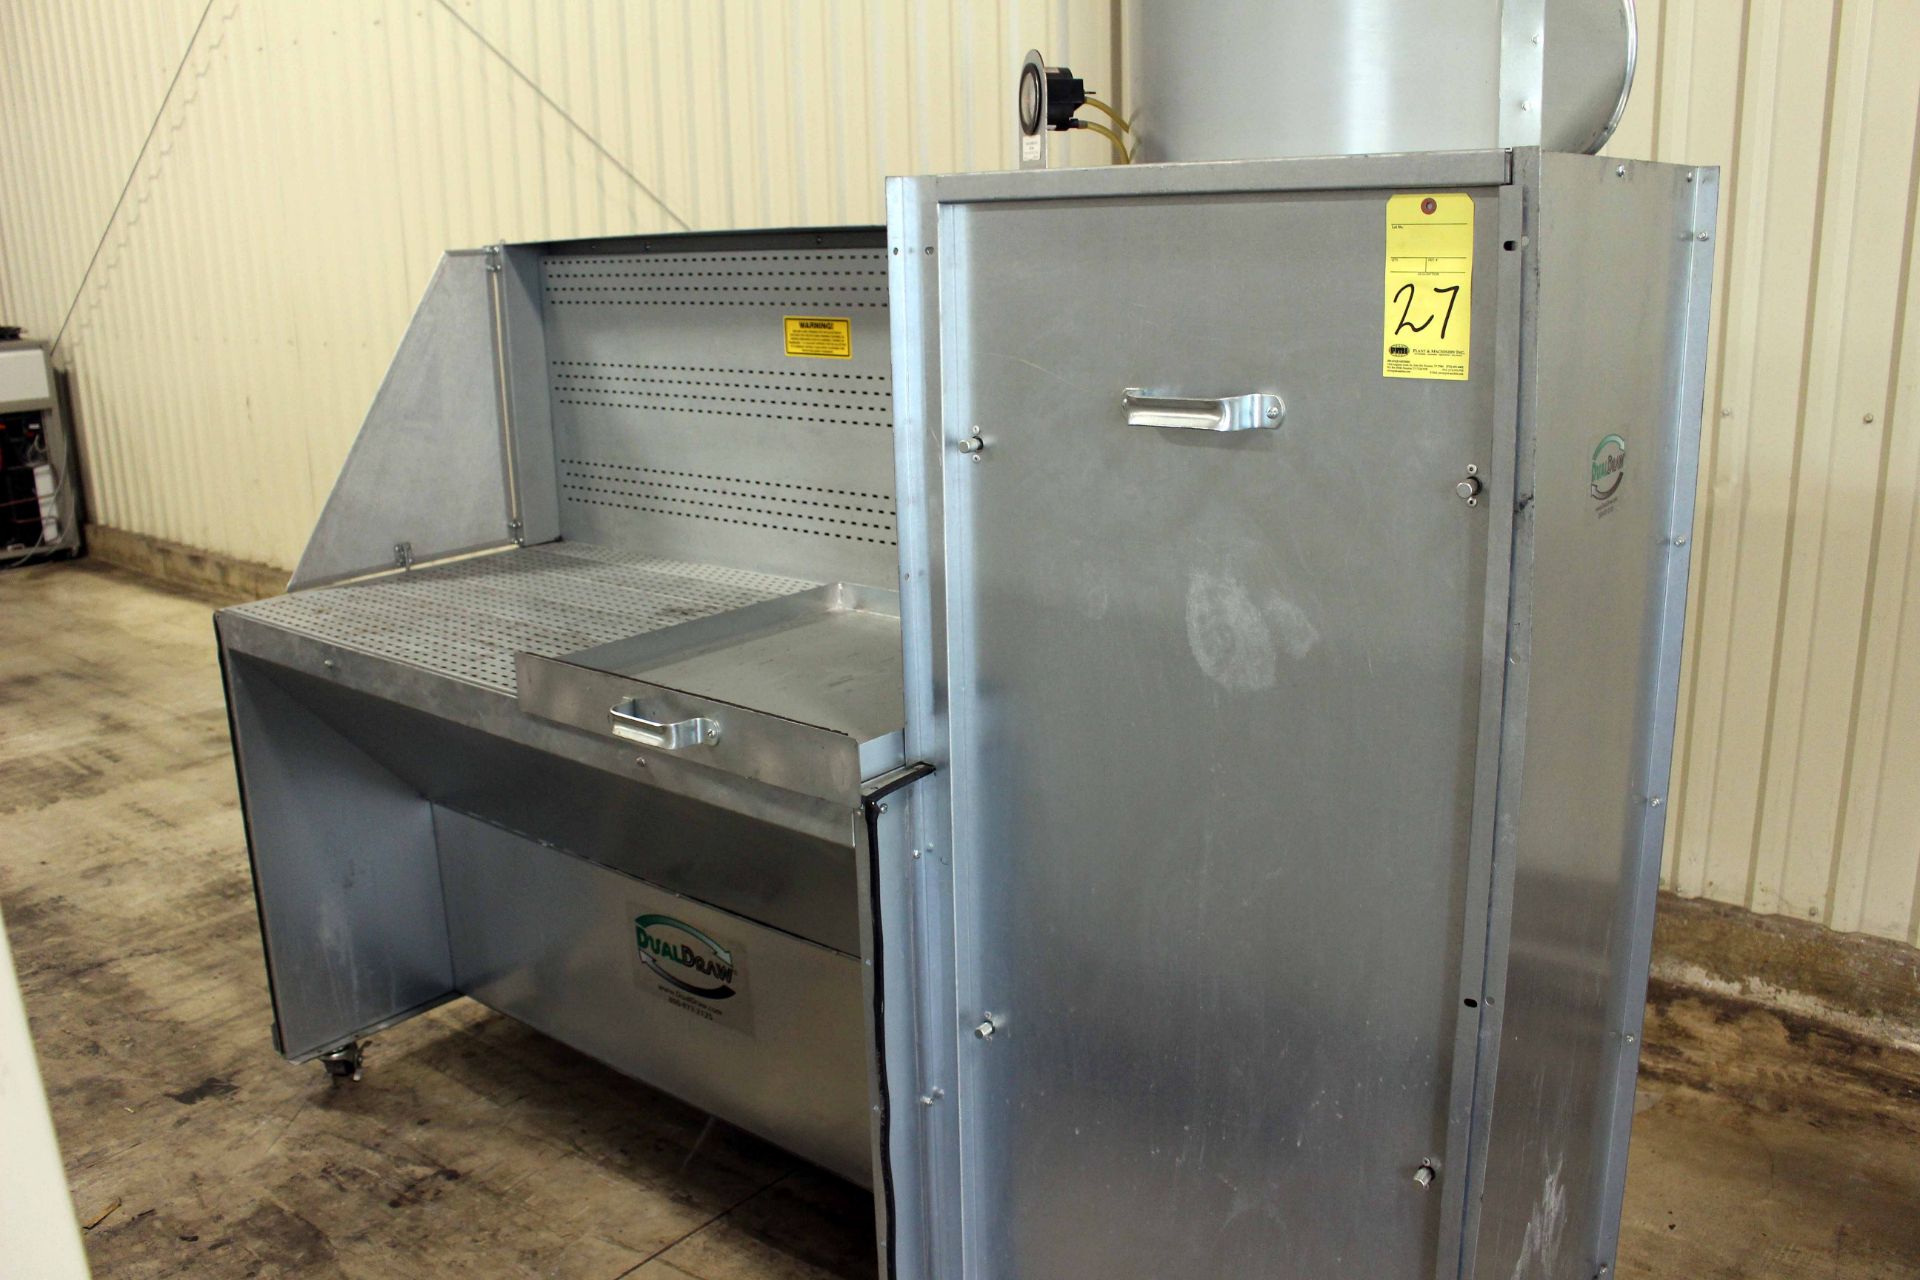 DUAL DRAW COMBINATION REAR & DOWNDRAFT CLEANING SYSTEM, integrated dust collector